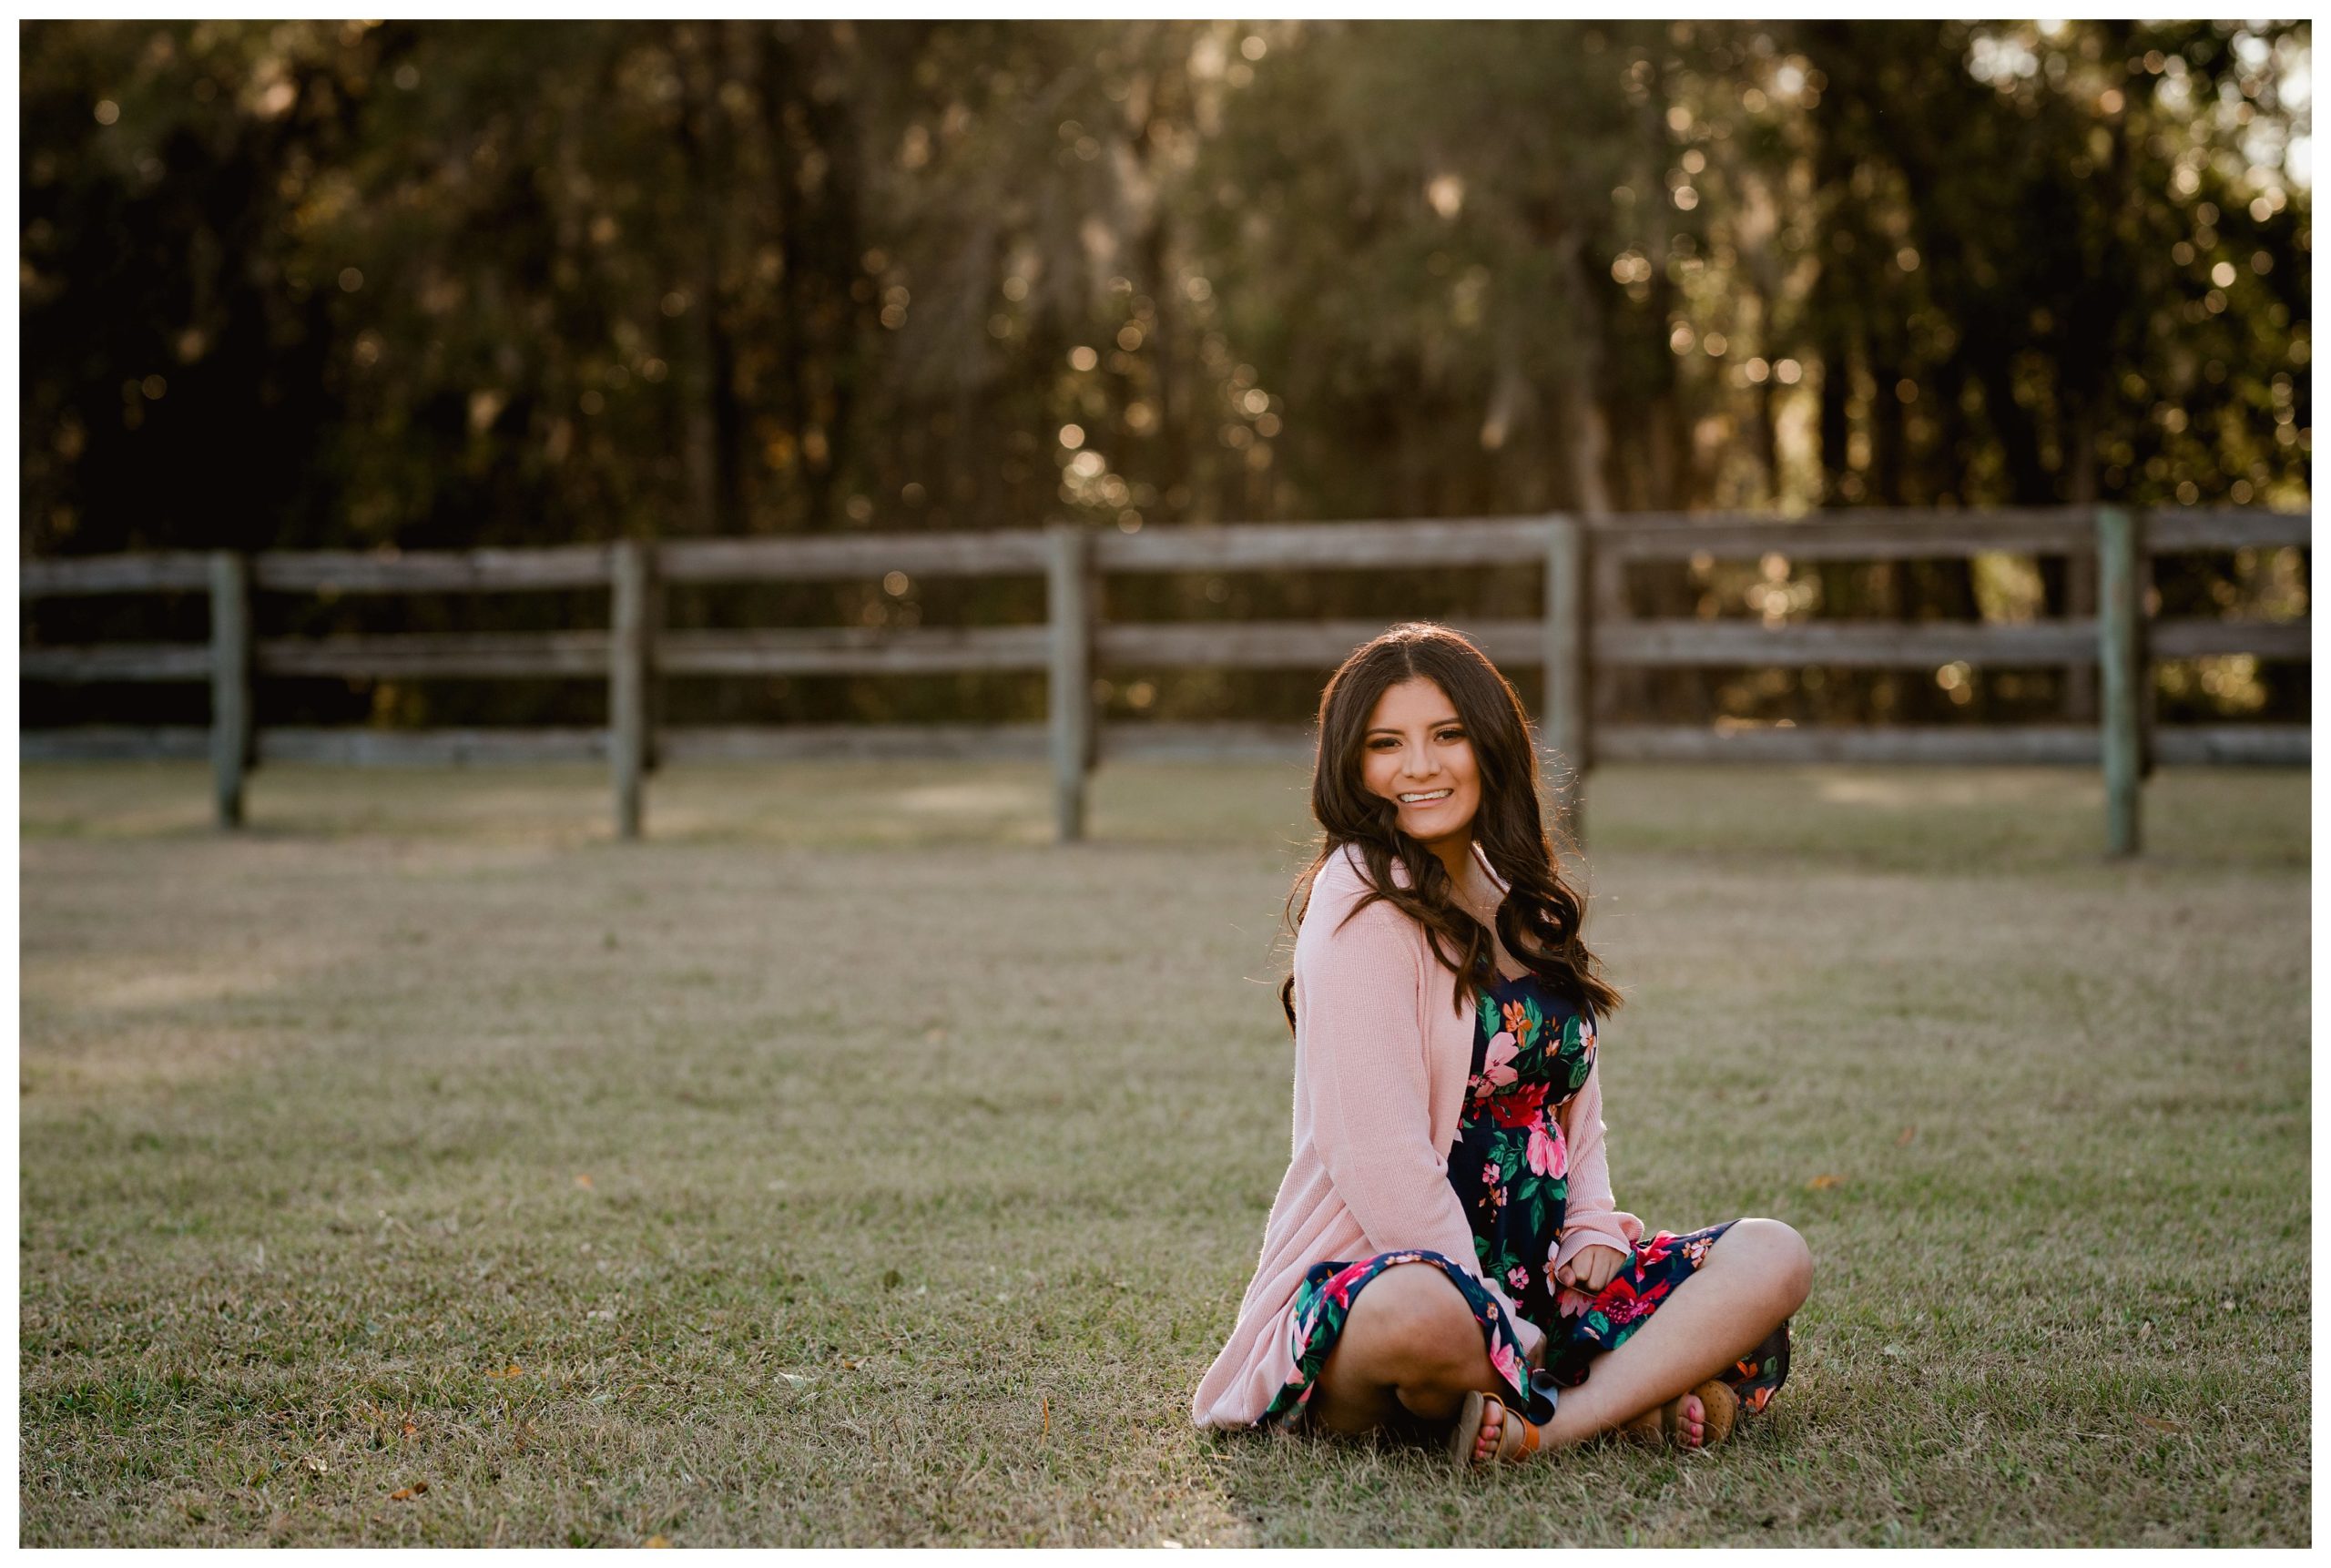 Golden hour senior pictures in North Florida by pro photographer.